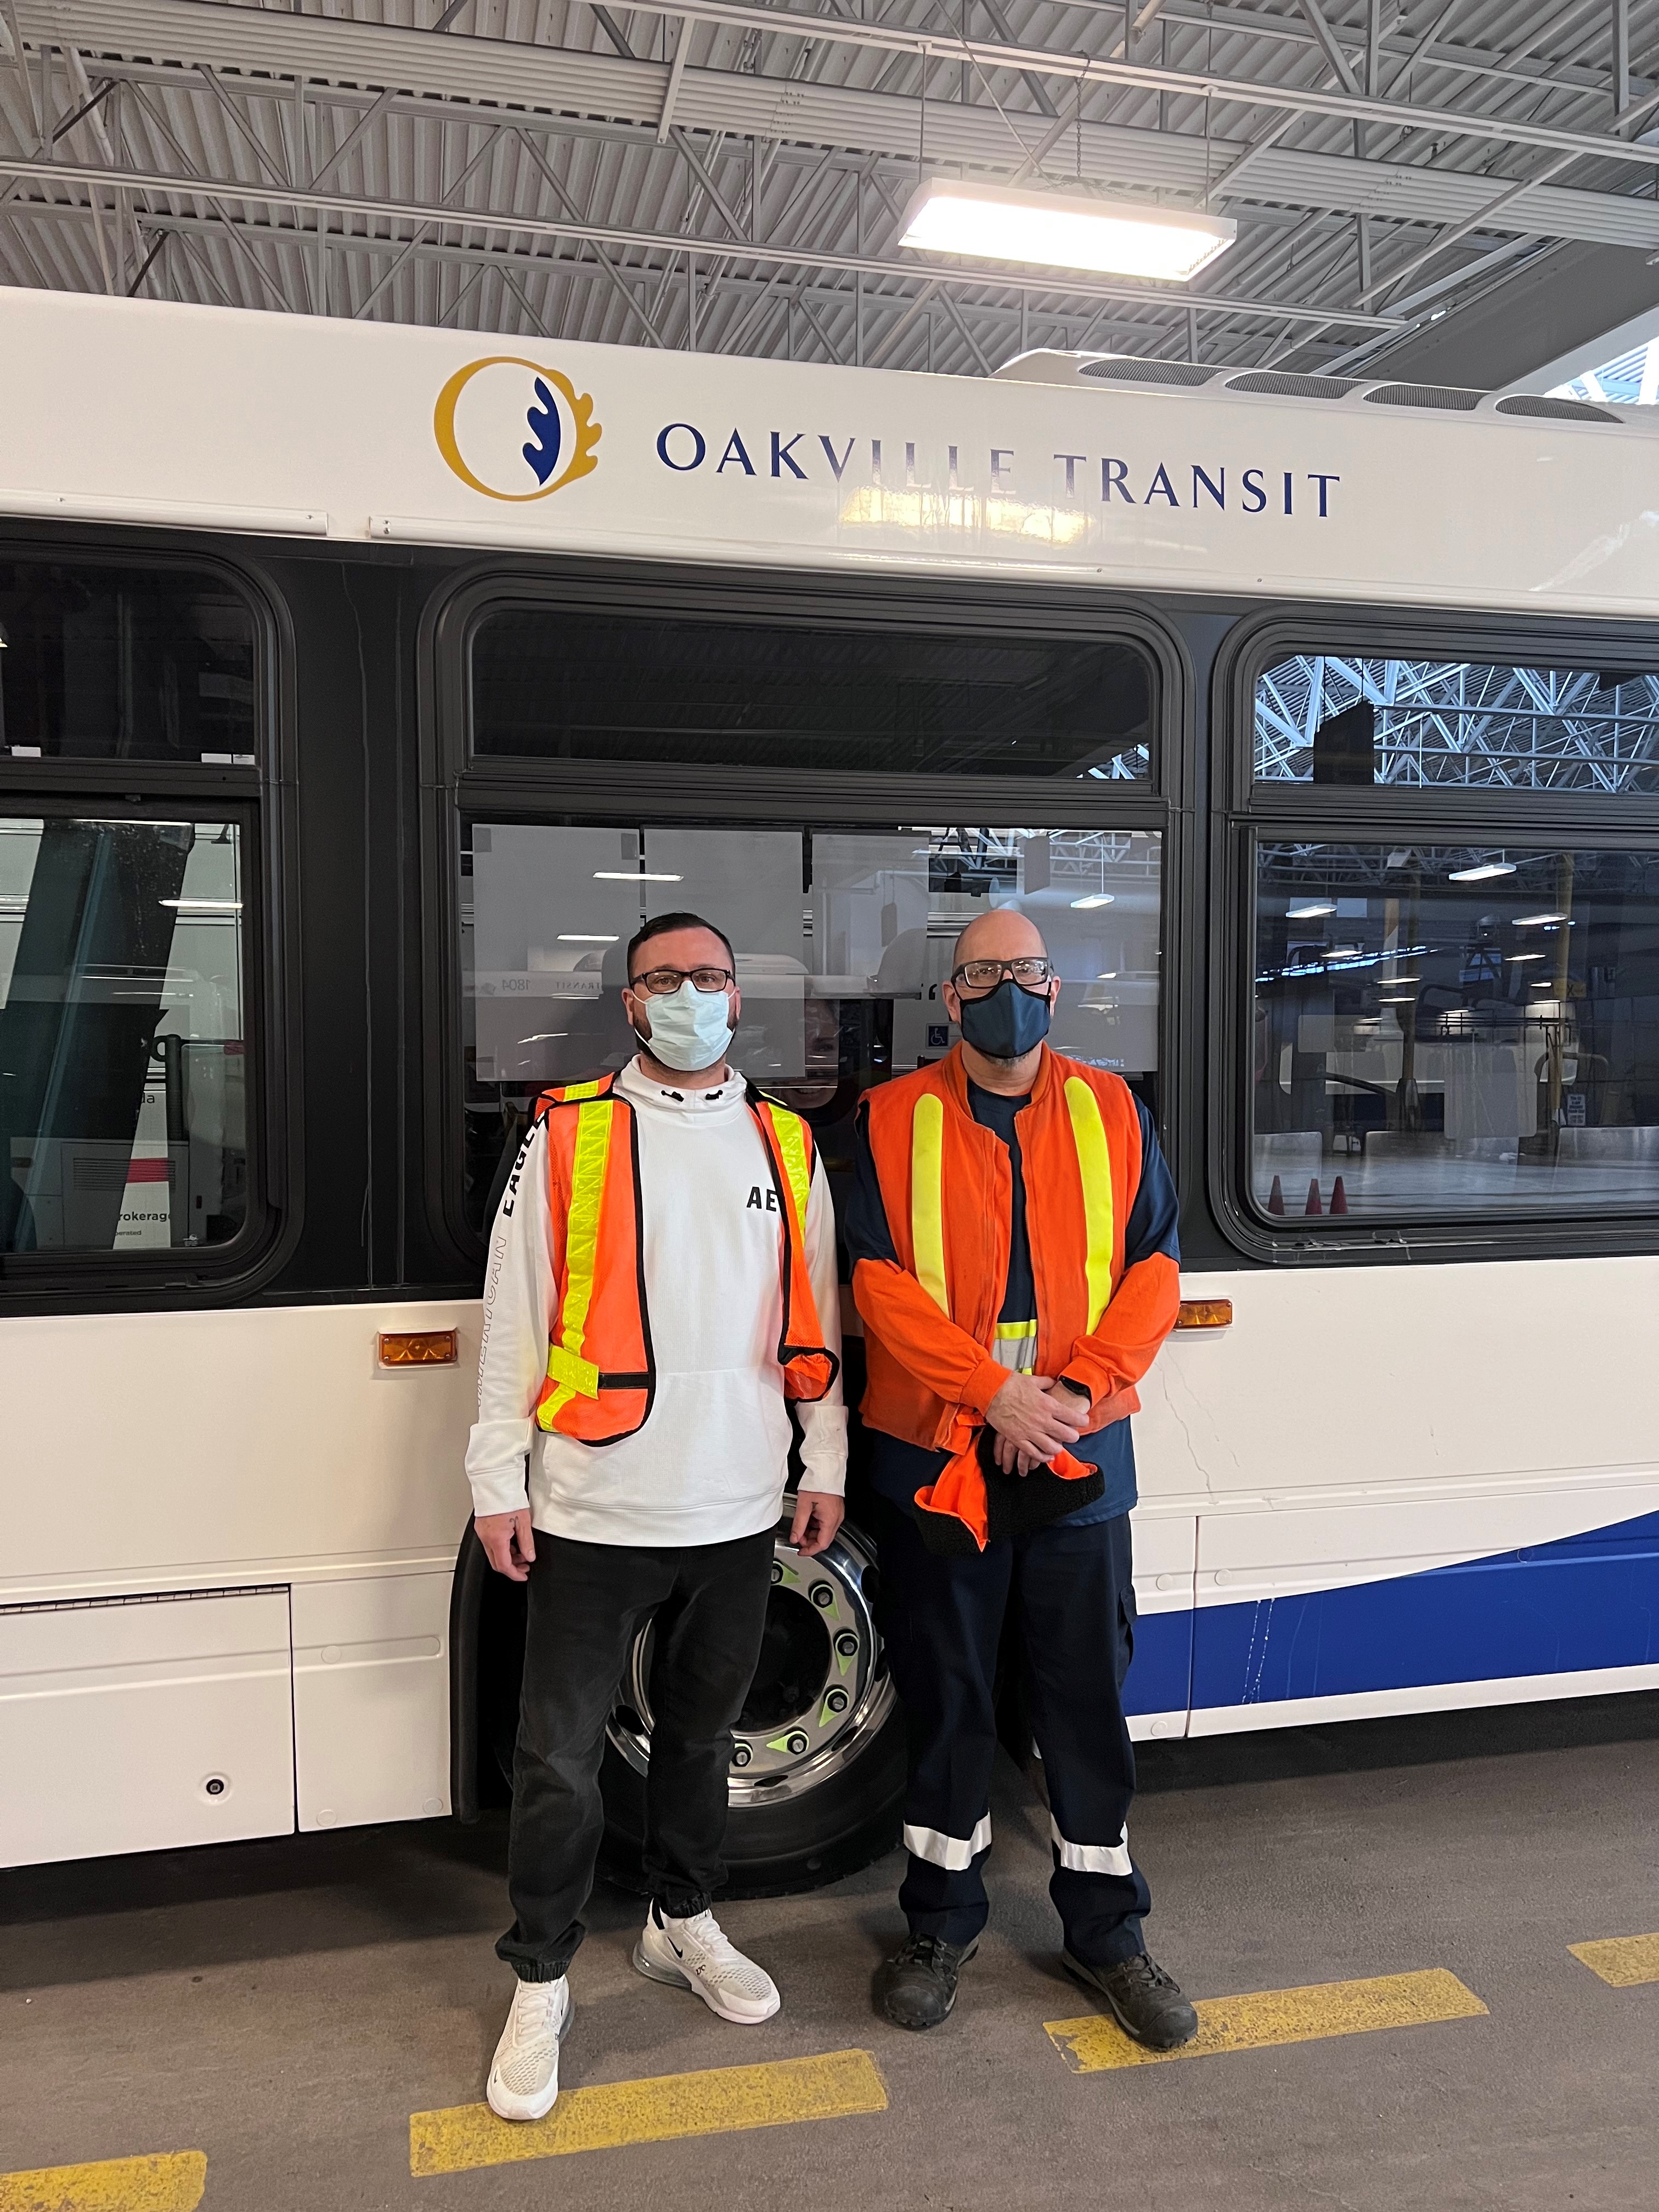 Two workers stand in front of Oakville Transit bus.